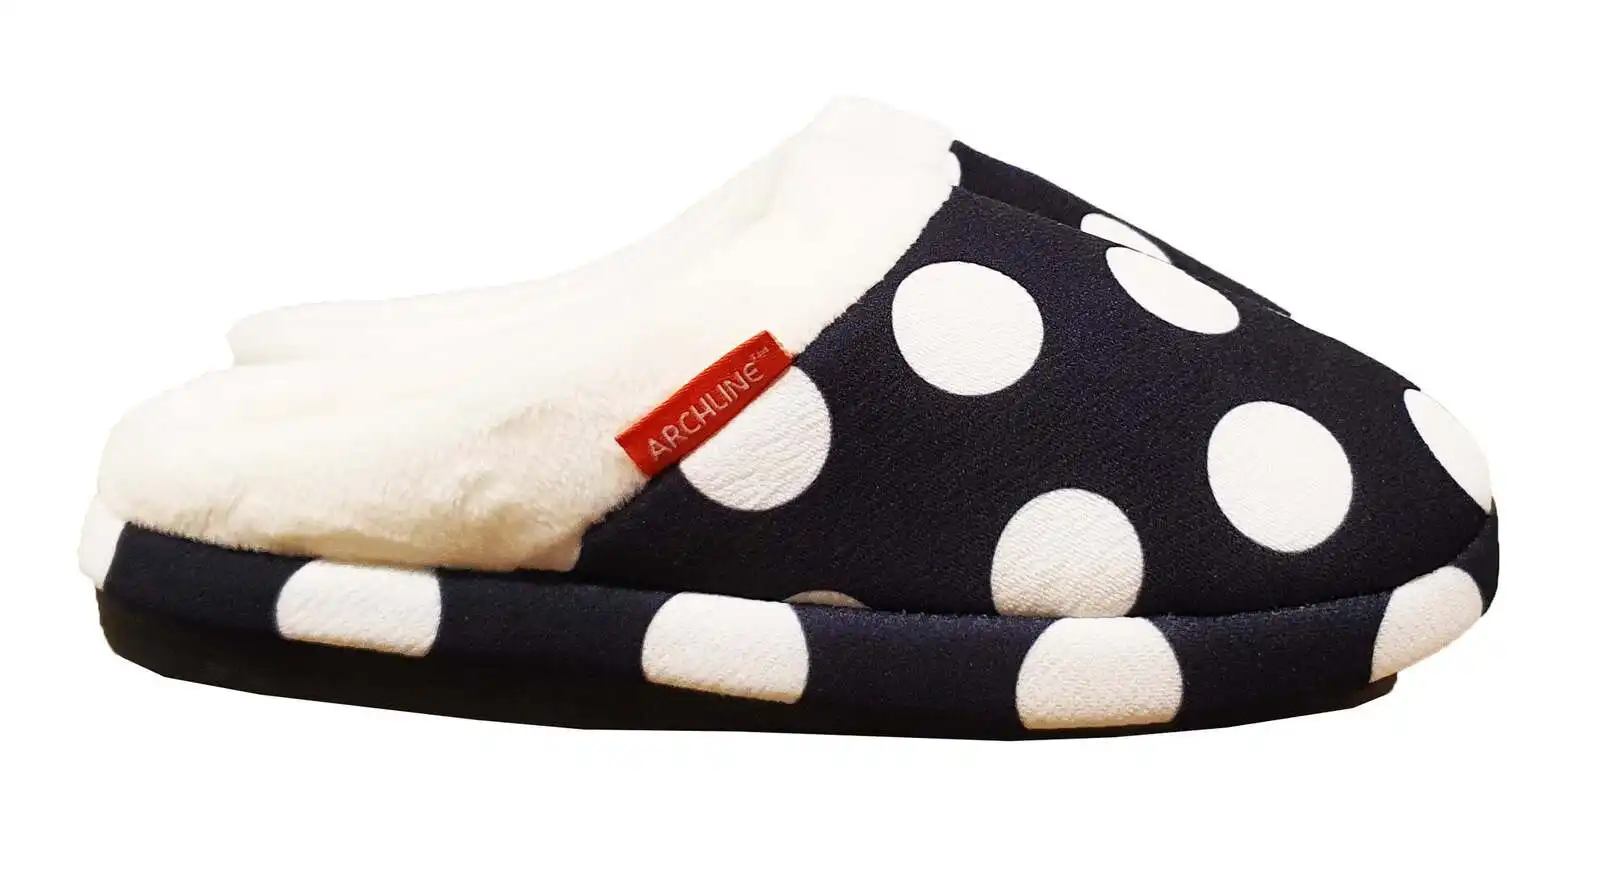 Archline Orthotic Slippers Slip On Arch Scuffs Pain Relief Moccasins - Polka Dots